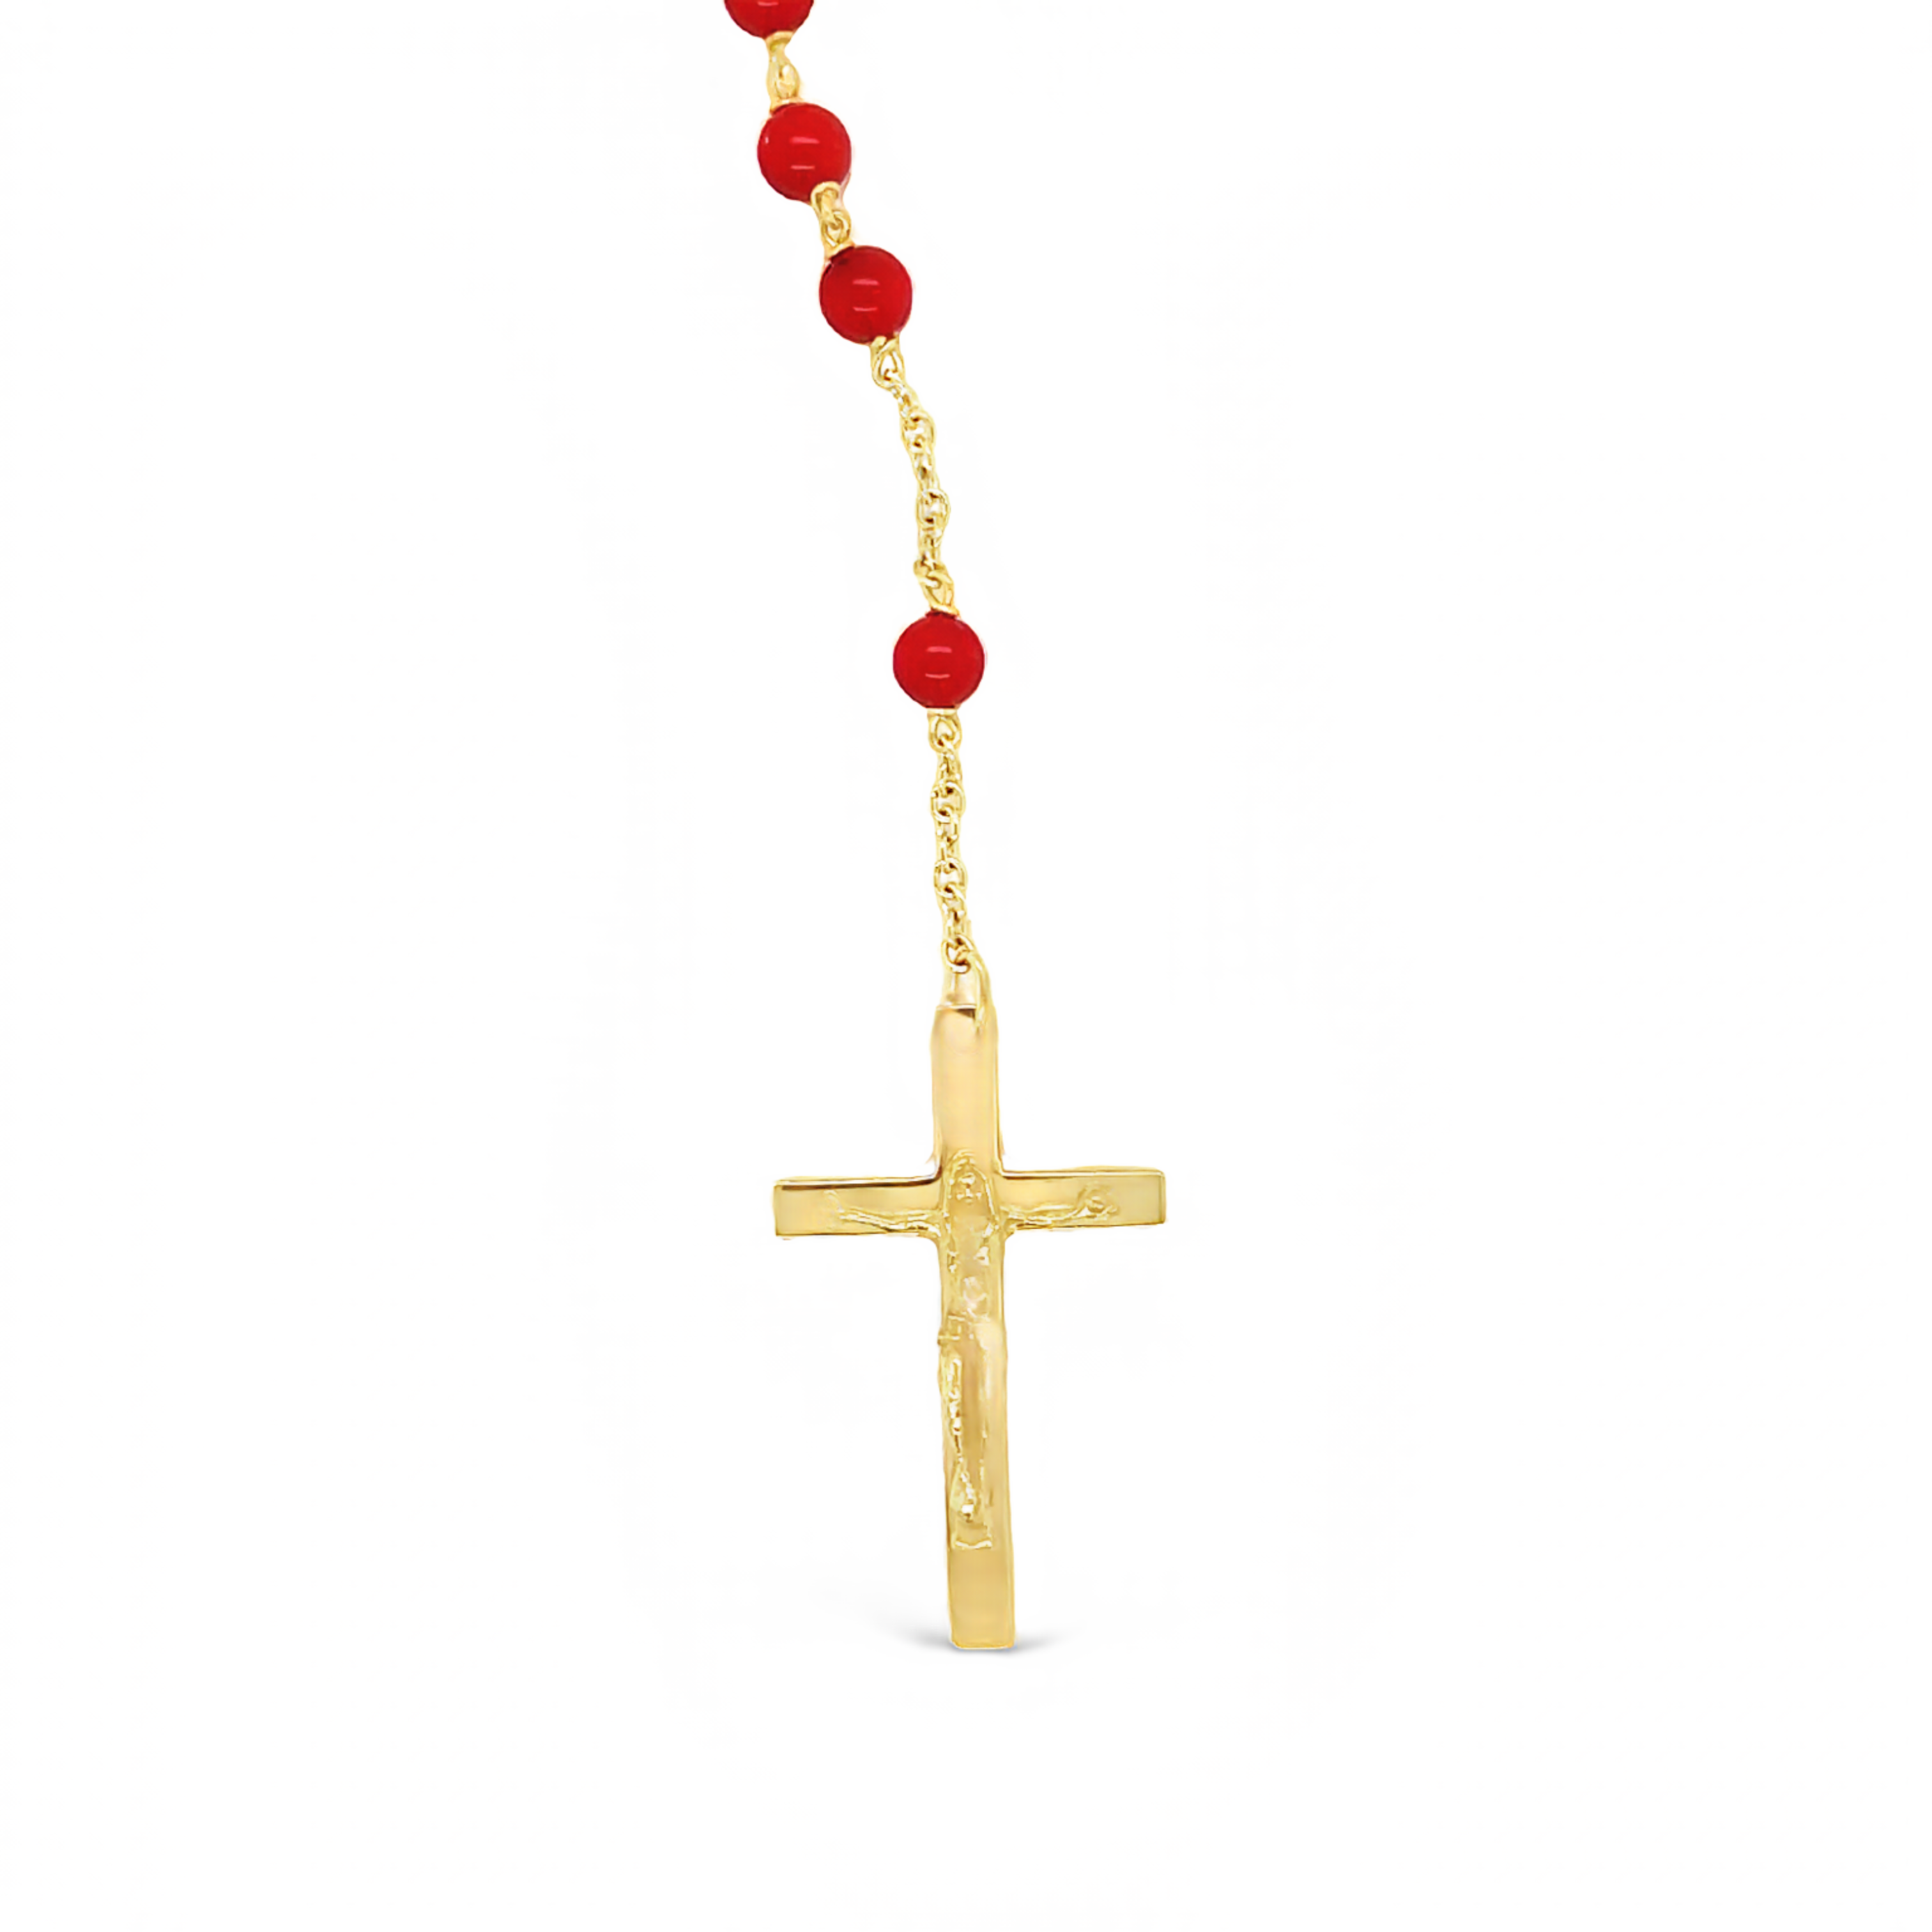 This 18k Italian Yellow Gold Coral Rosary Necklace features a 28" long chain with 4.00mm beads from Corsica, a matte finished Cross charm and a high polished crucifix. 